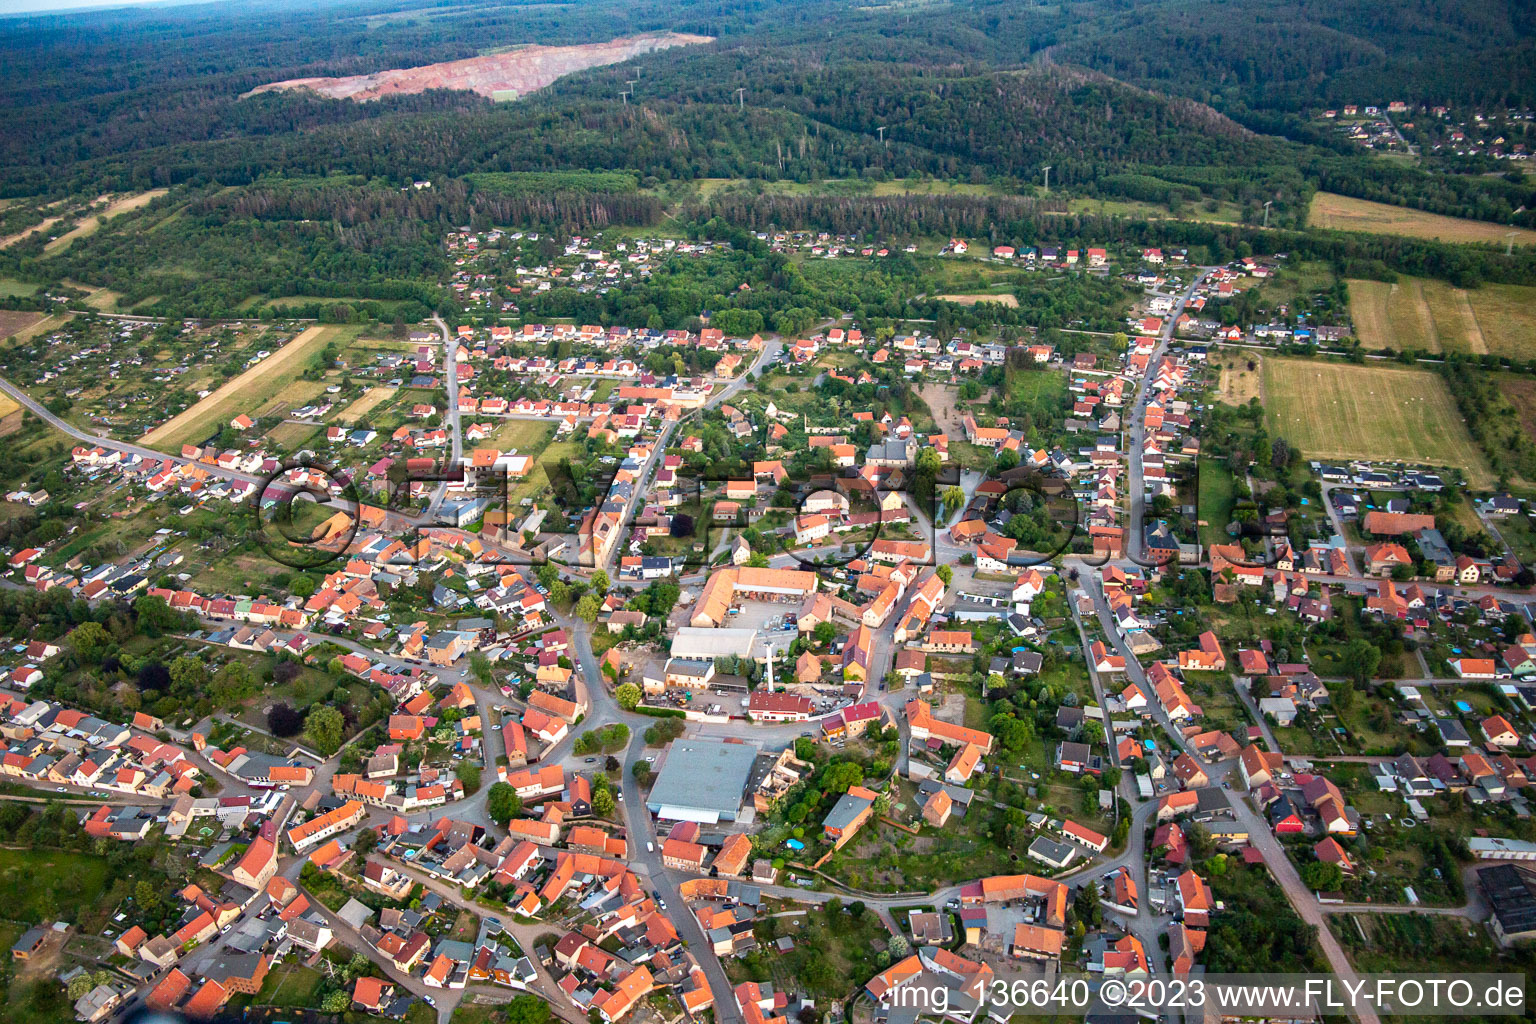 From the north in the district Rieder in Ballenstedt in the state Saxony-Anhalt, Germany